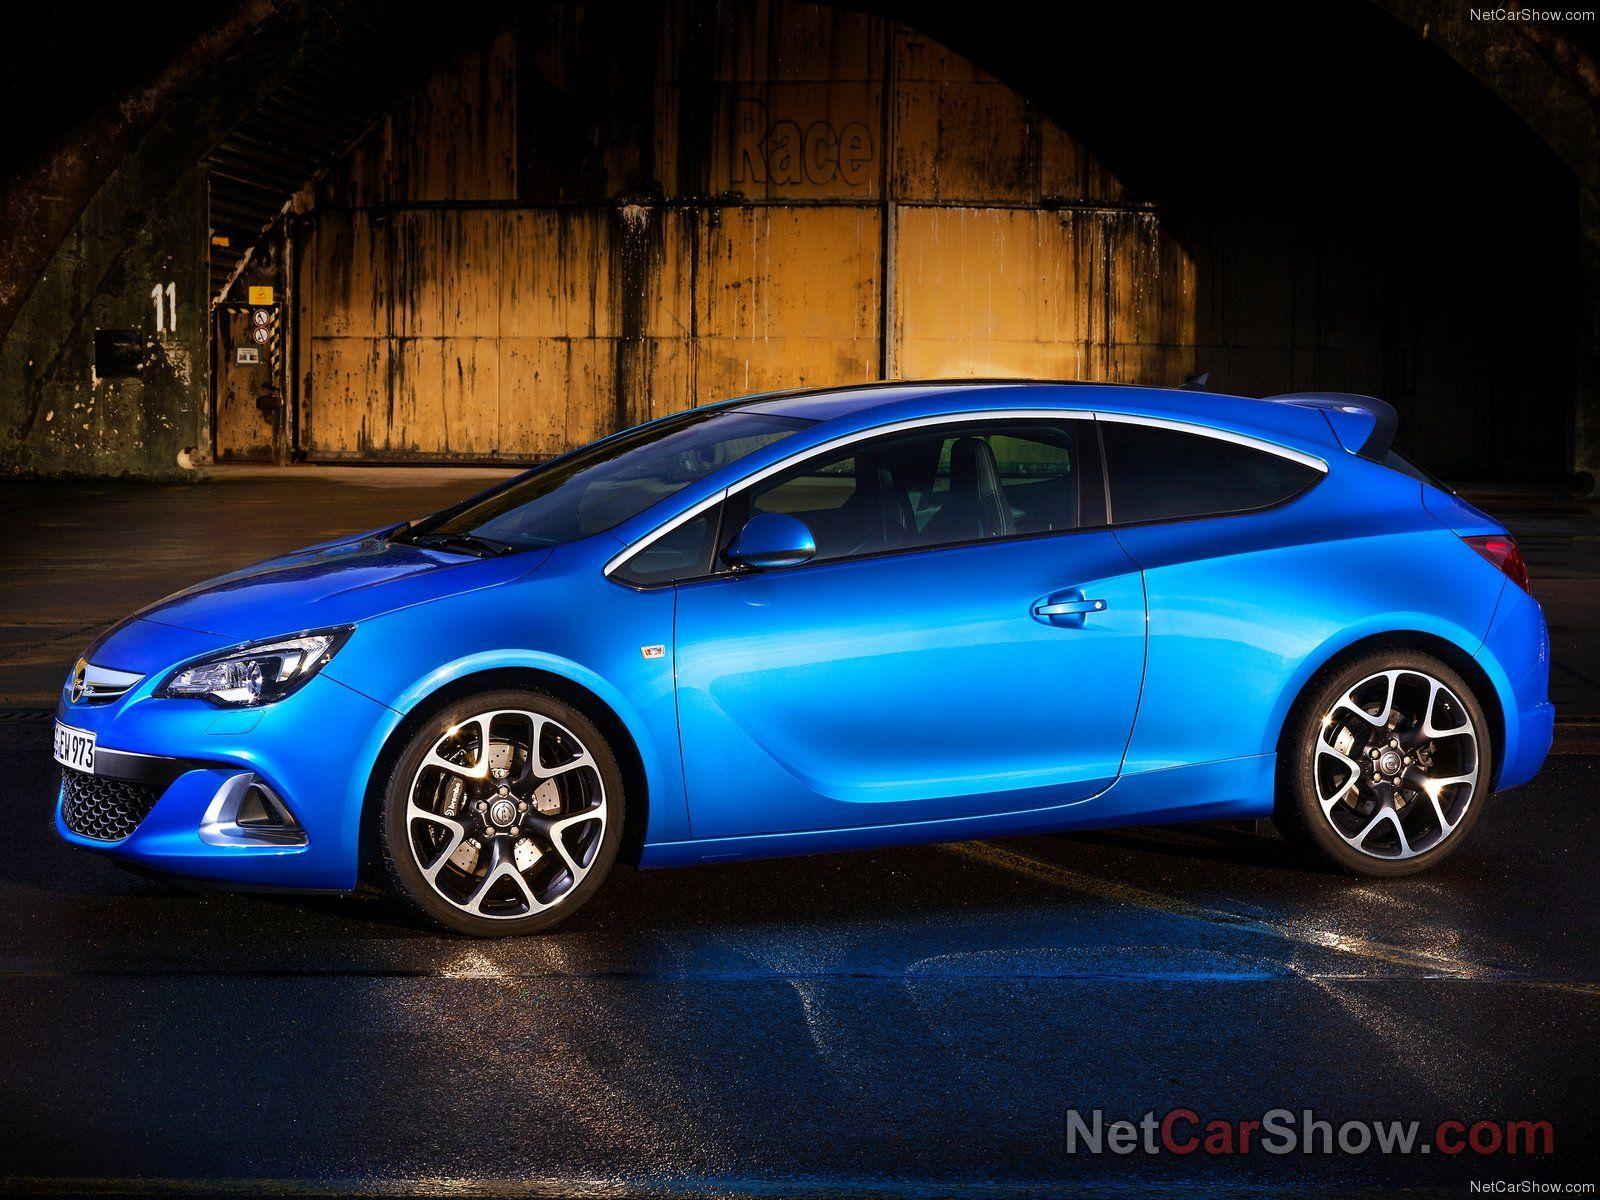 Opel Astra OPC picture # 92970. Opel photo gallery